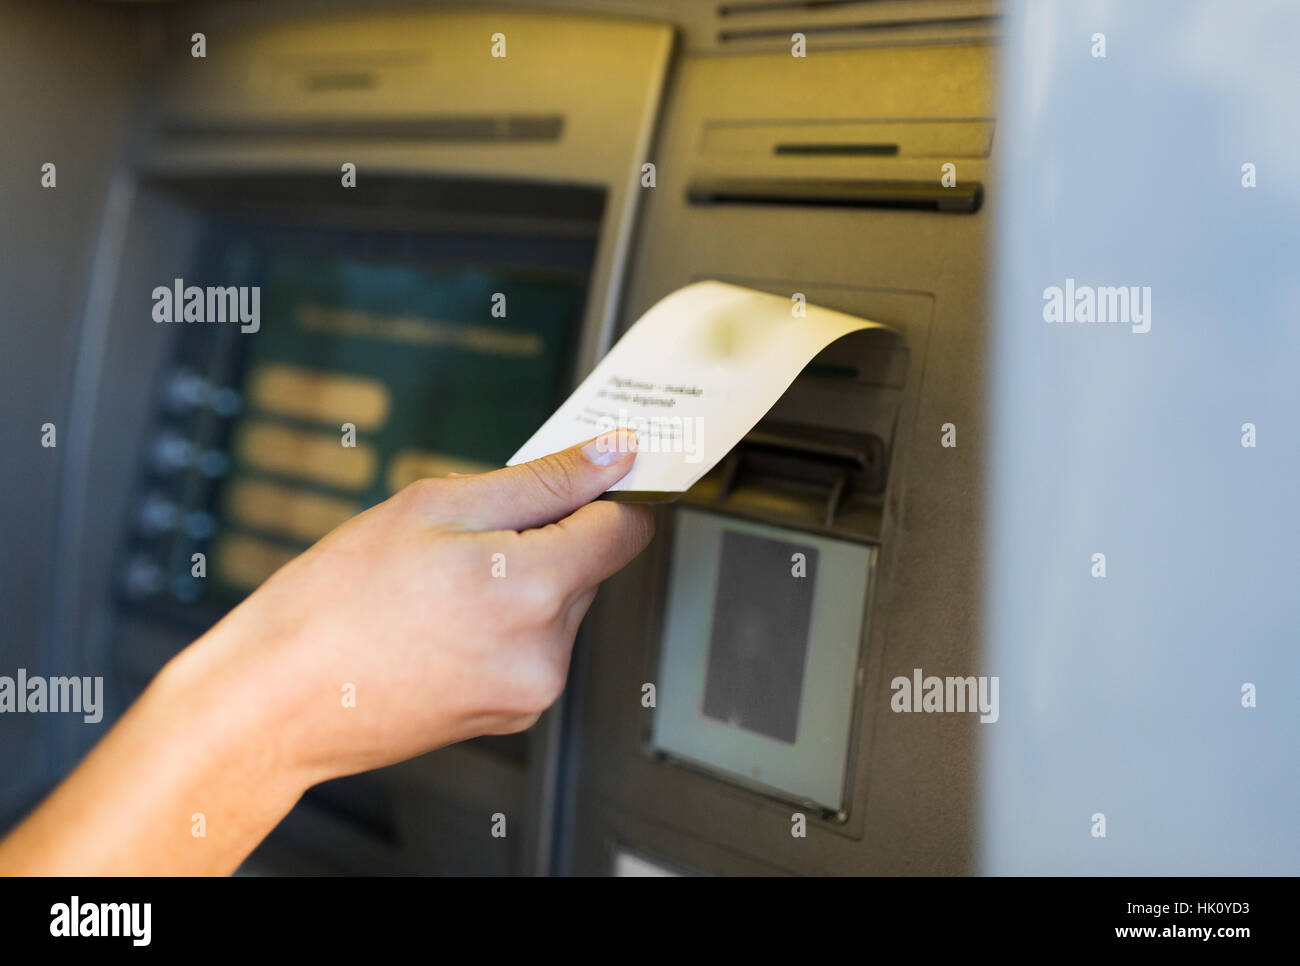 close up of hand taking receipt from atm machine Stock Photo